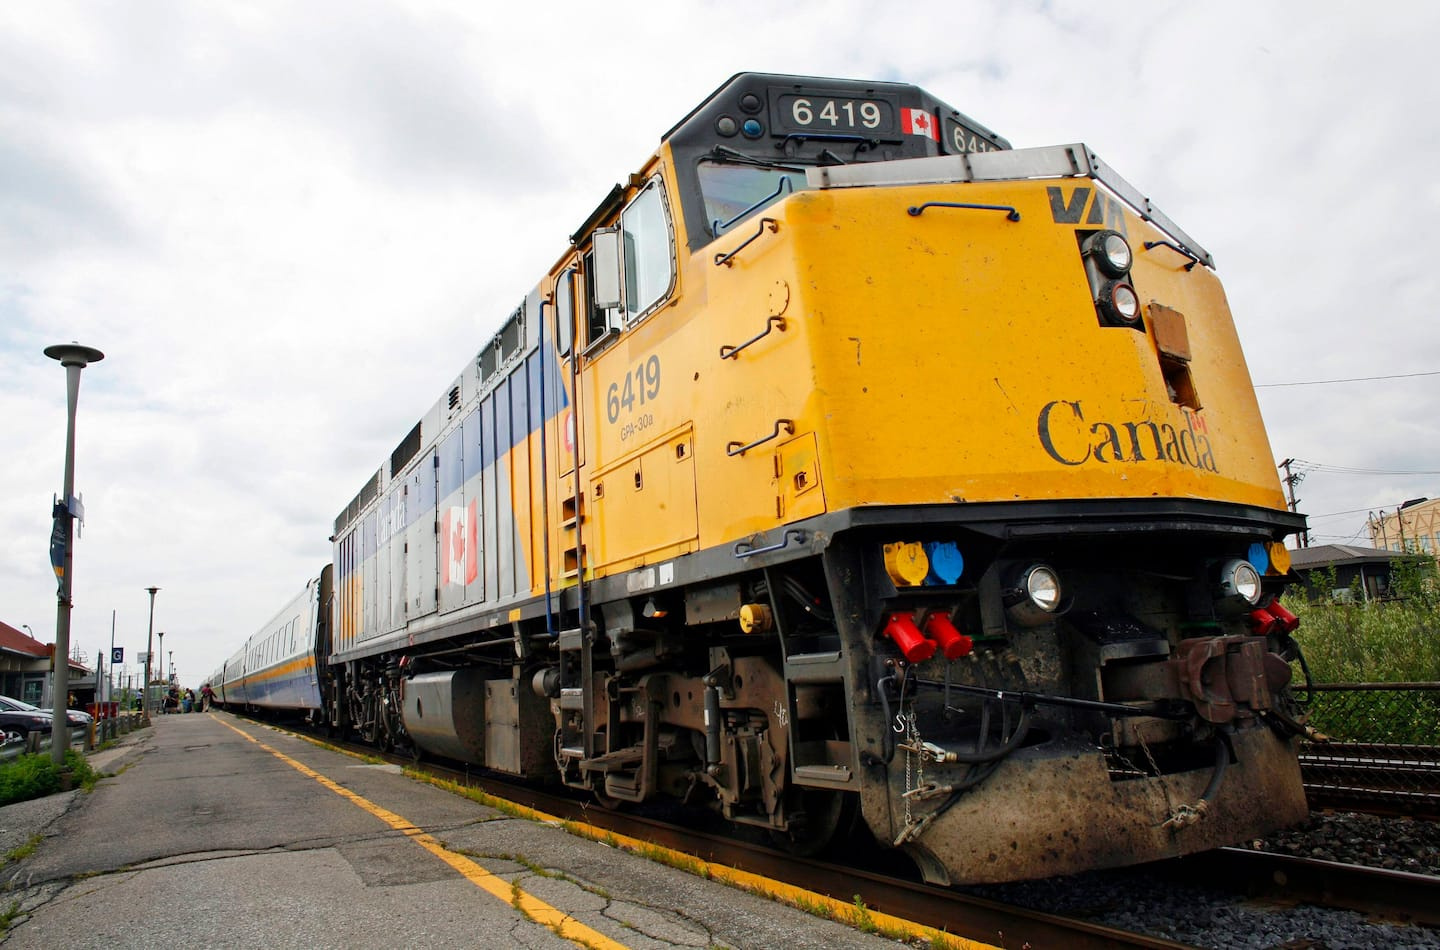 Cancellations and delays at VIA Rail: the Minister of Transport denounces an “unacceptable” situation